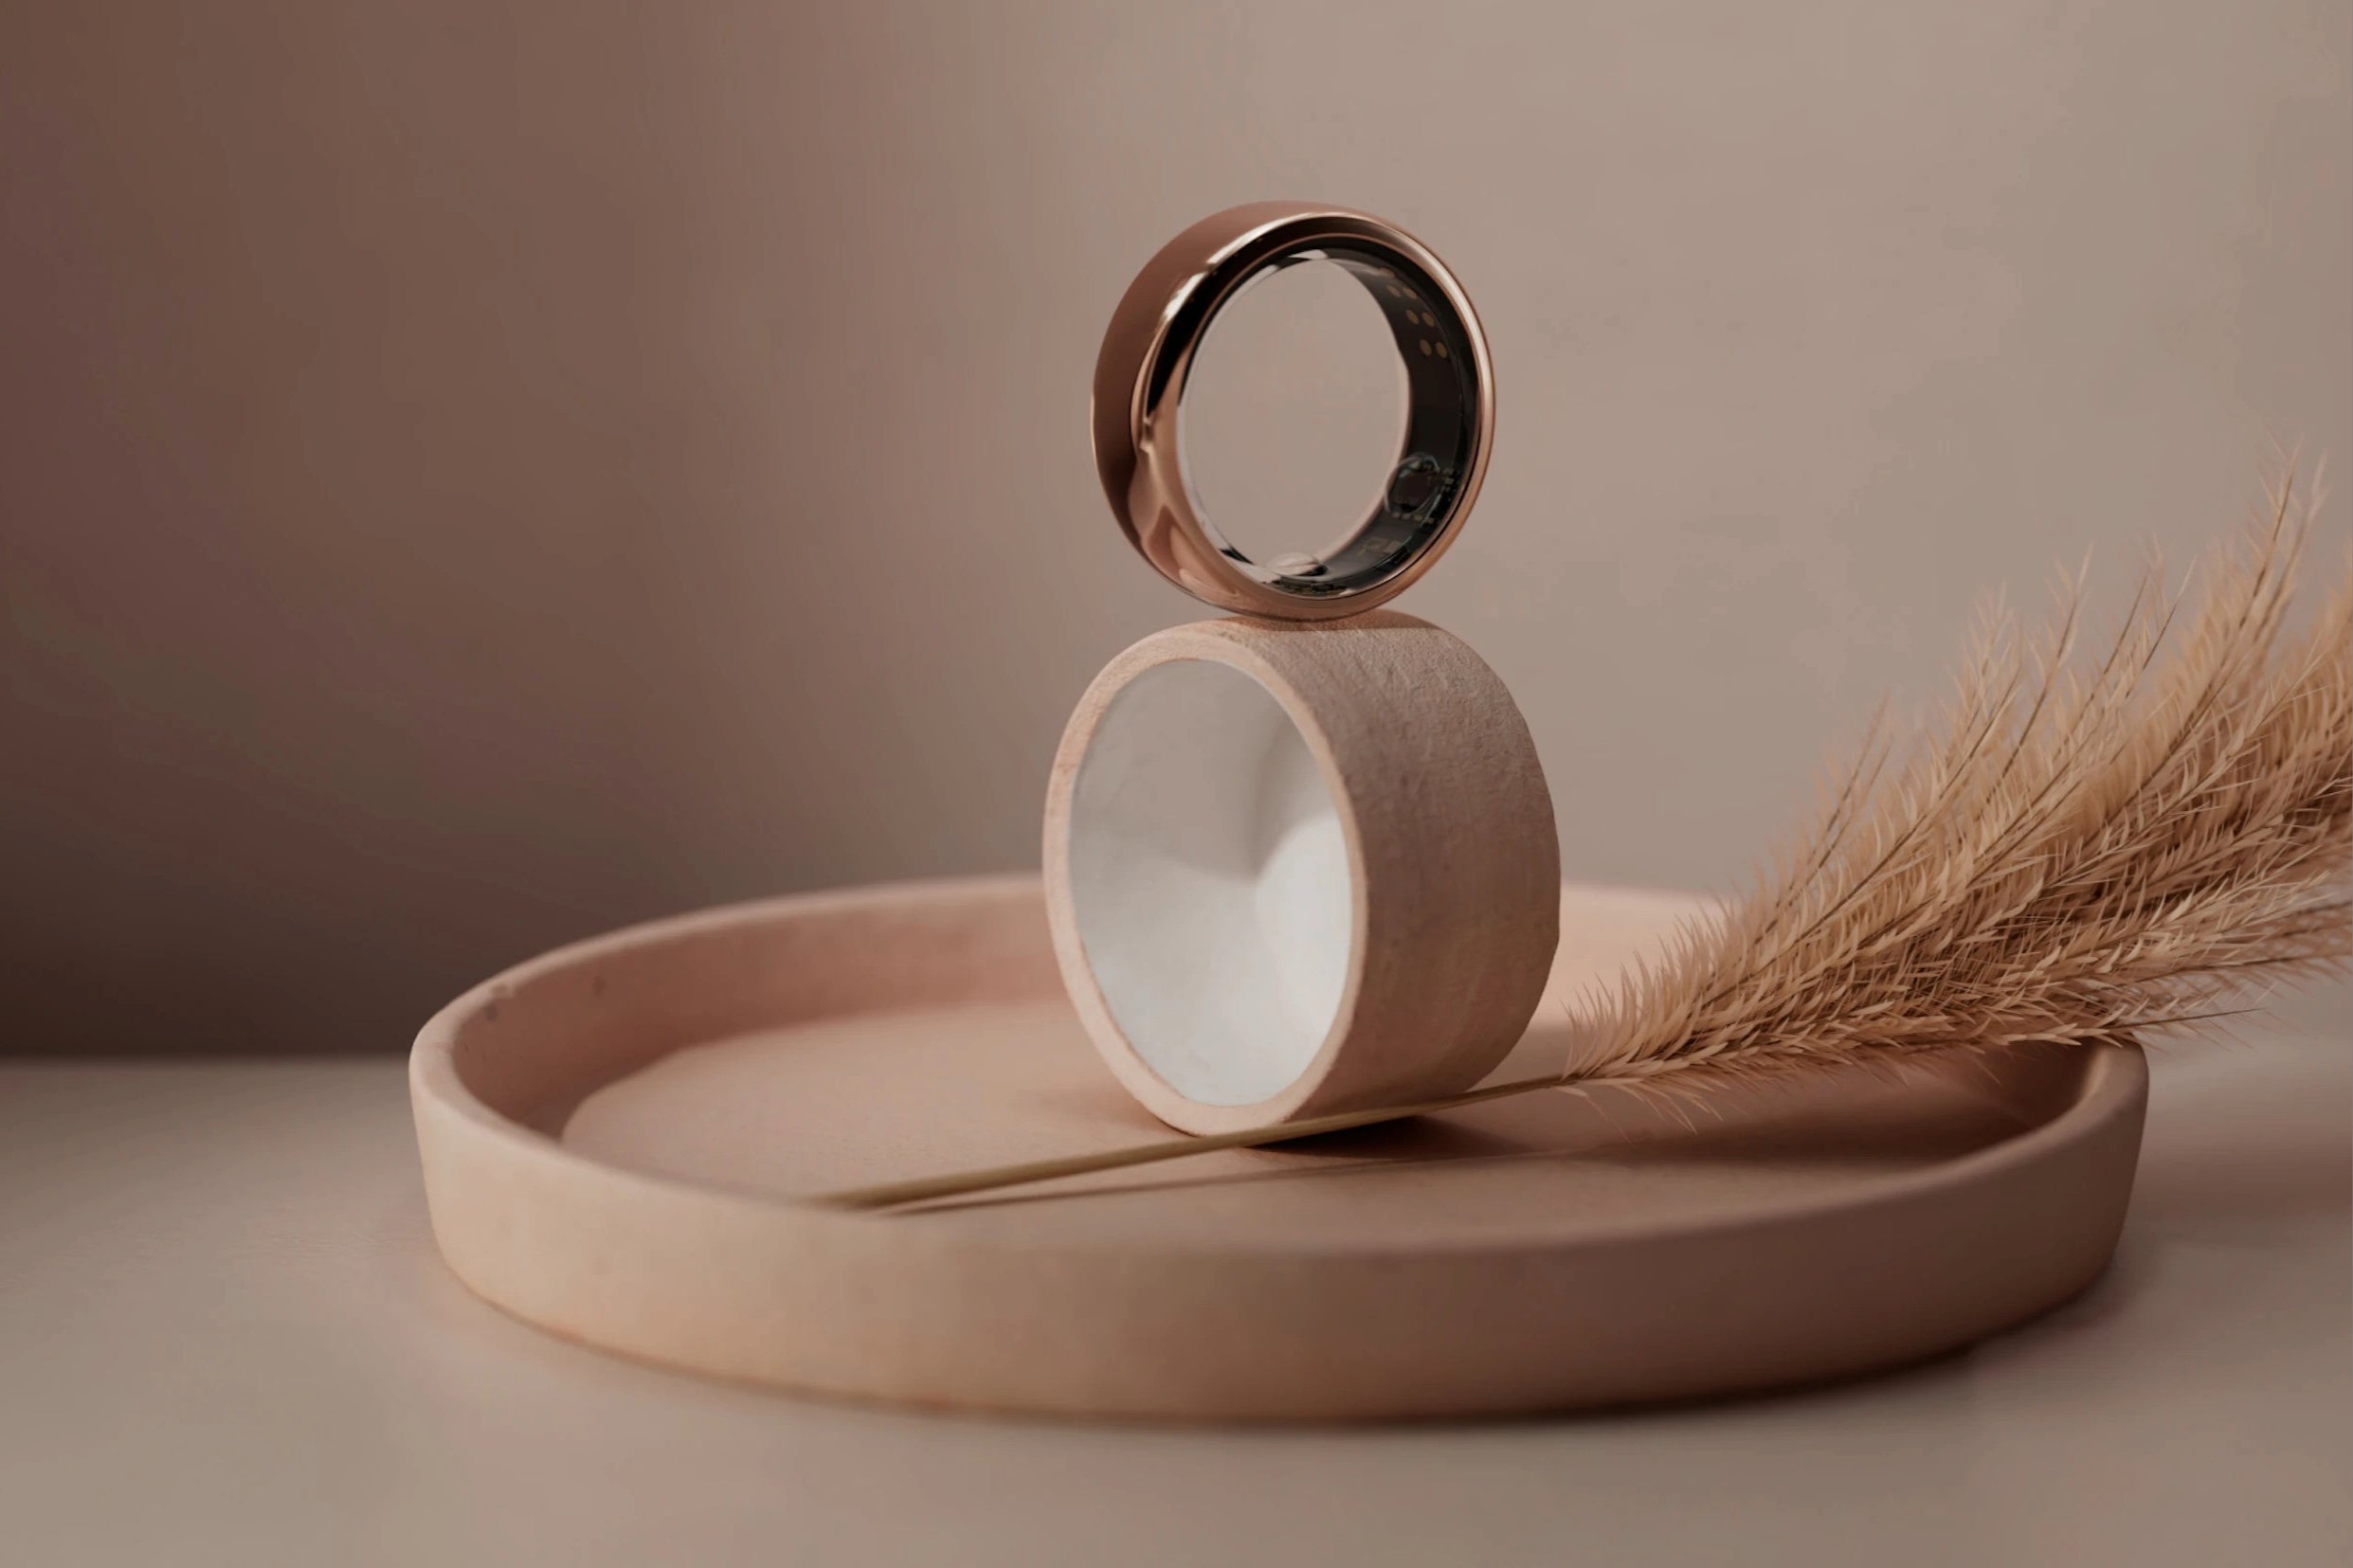 Oura Ring in Rose Gold (Image Credit–Oura) - The Galaxy Ring: Тhe new must-have gadget or another ecosystem gimmick?